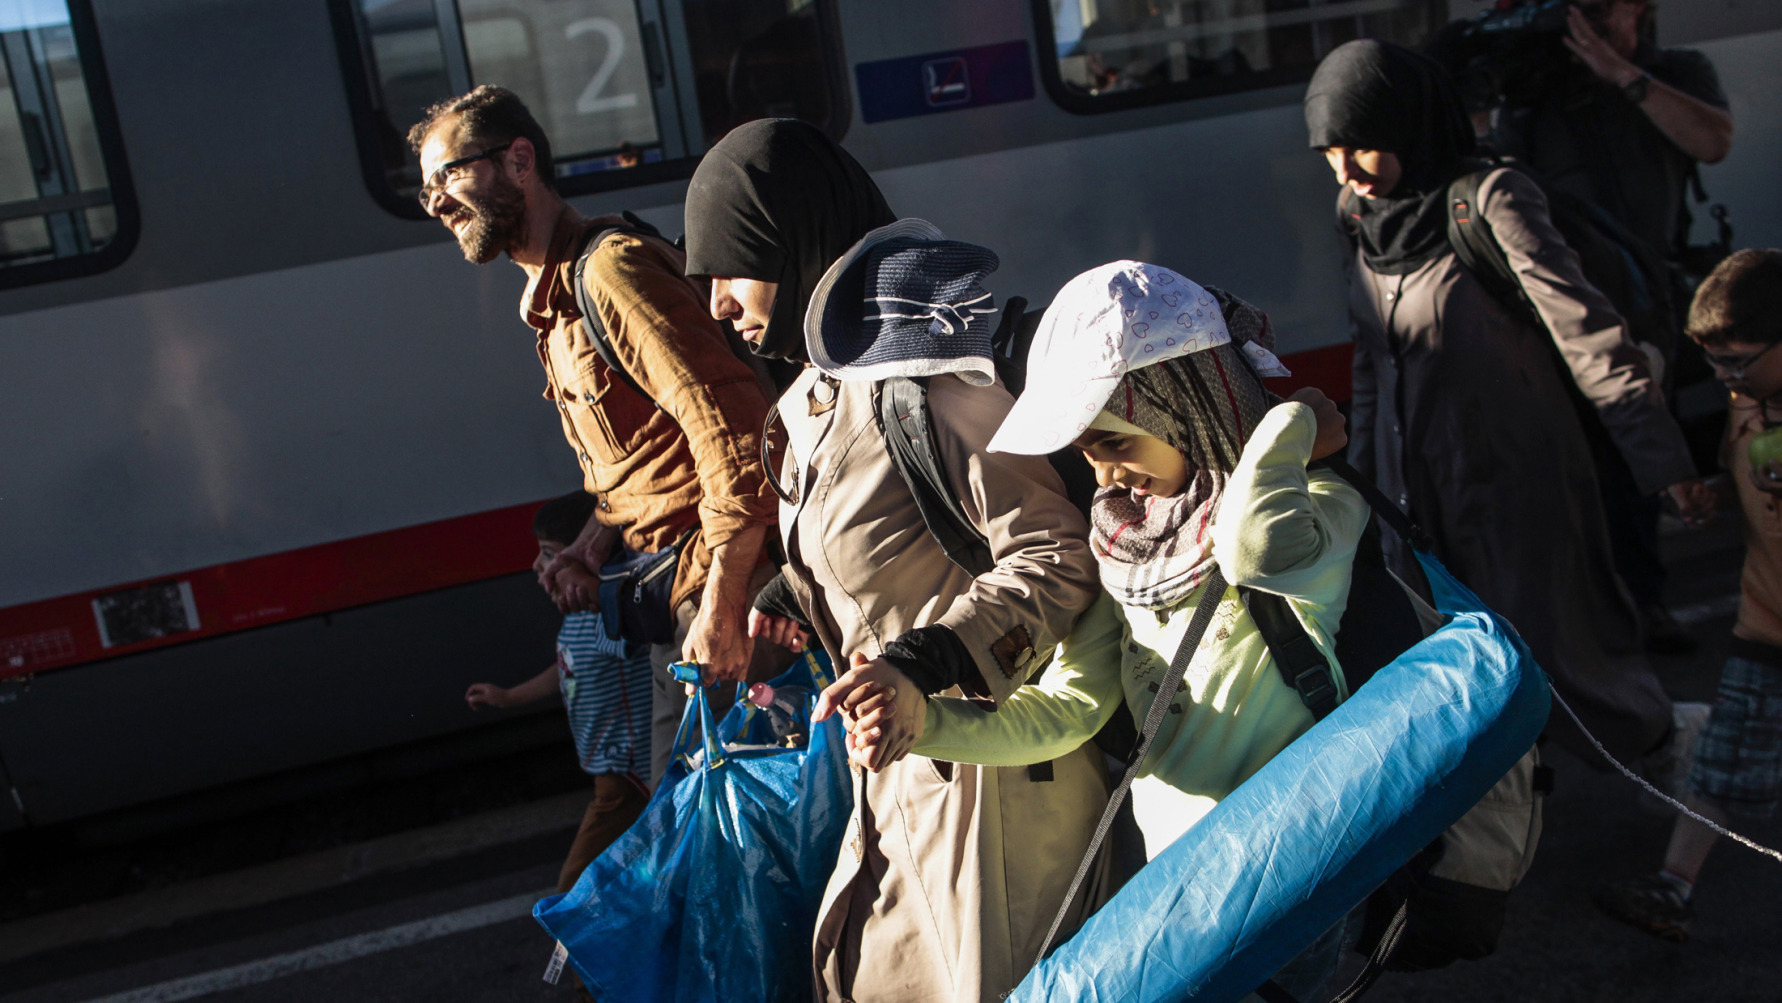 Migrants walk on a platform after arriving from Budapest, at Vienna's Westbahnhof railway station, on Aug. 31.
